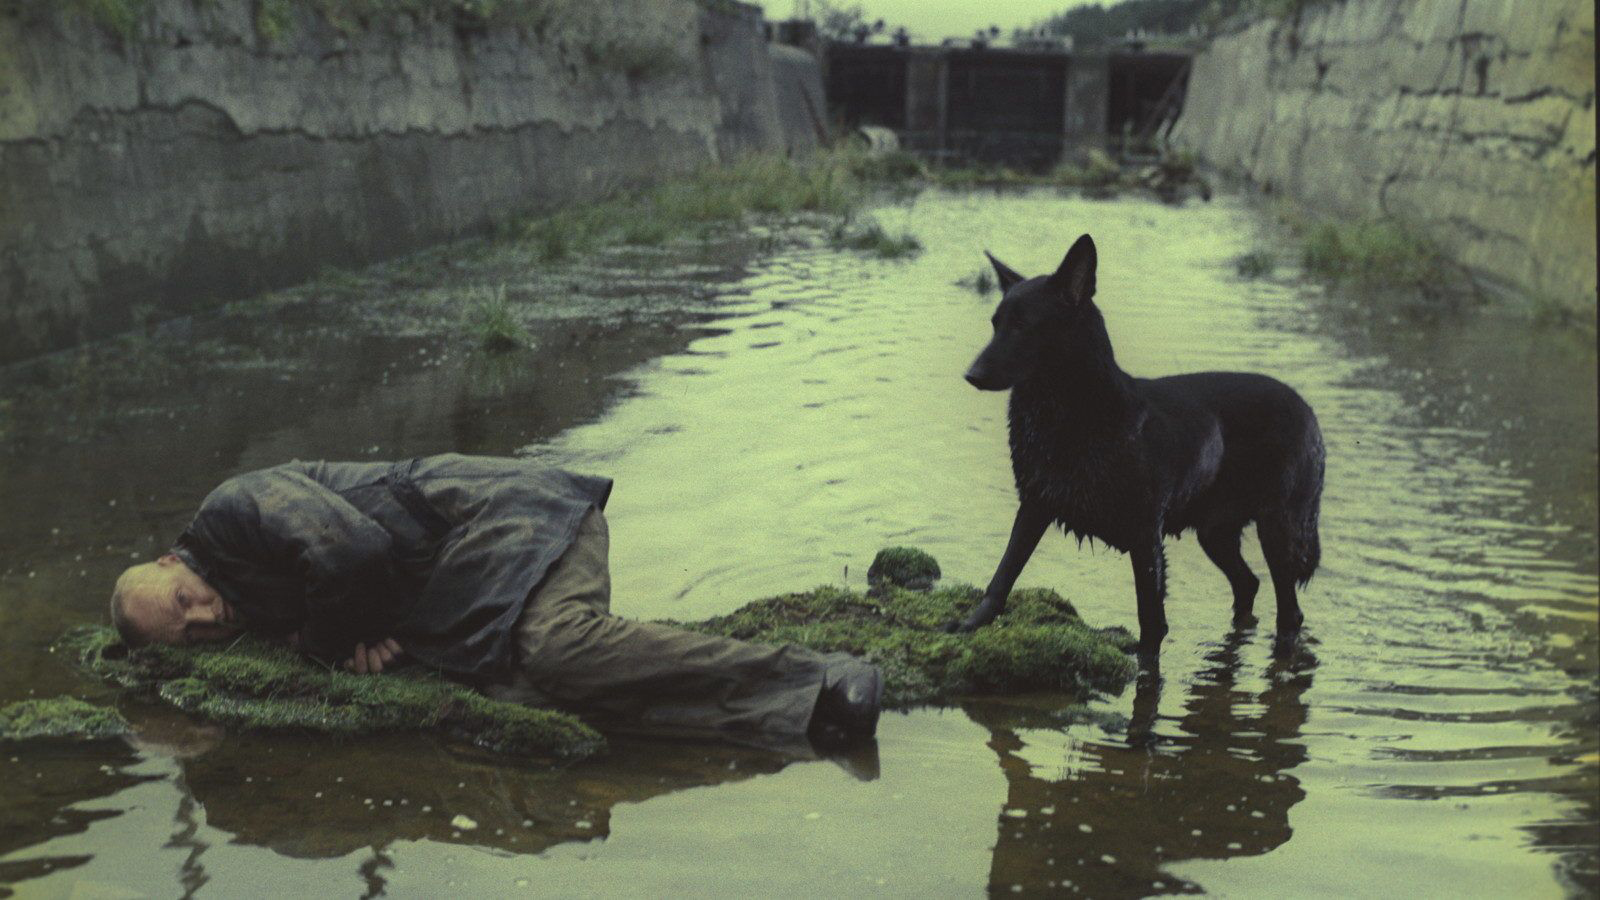 the stalker and a dog lying on a small patch of dirt in the middle of a wetland